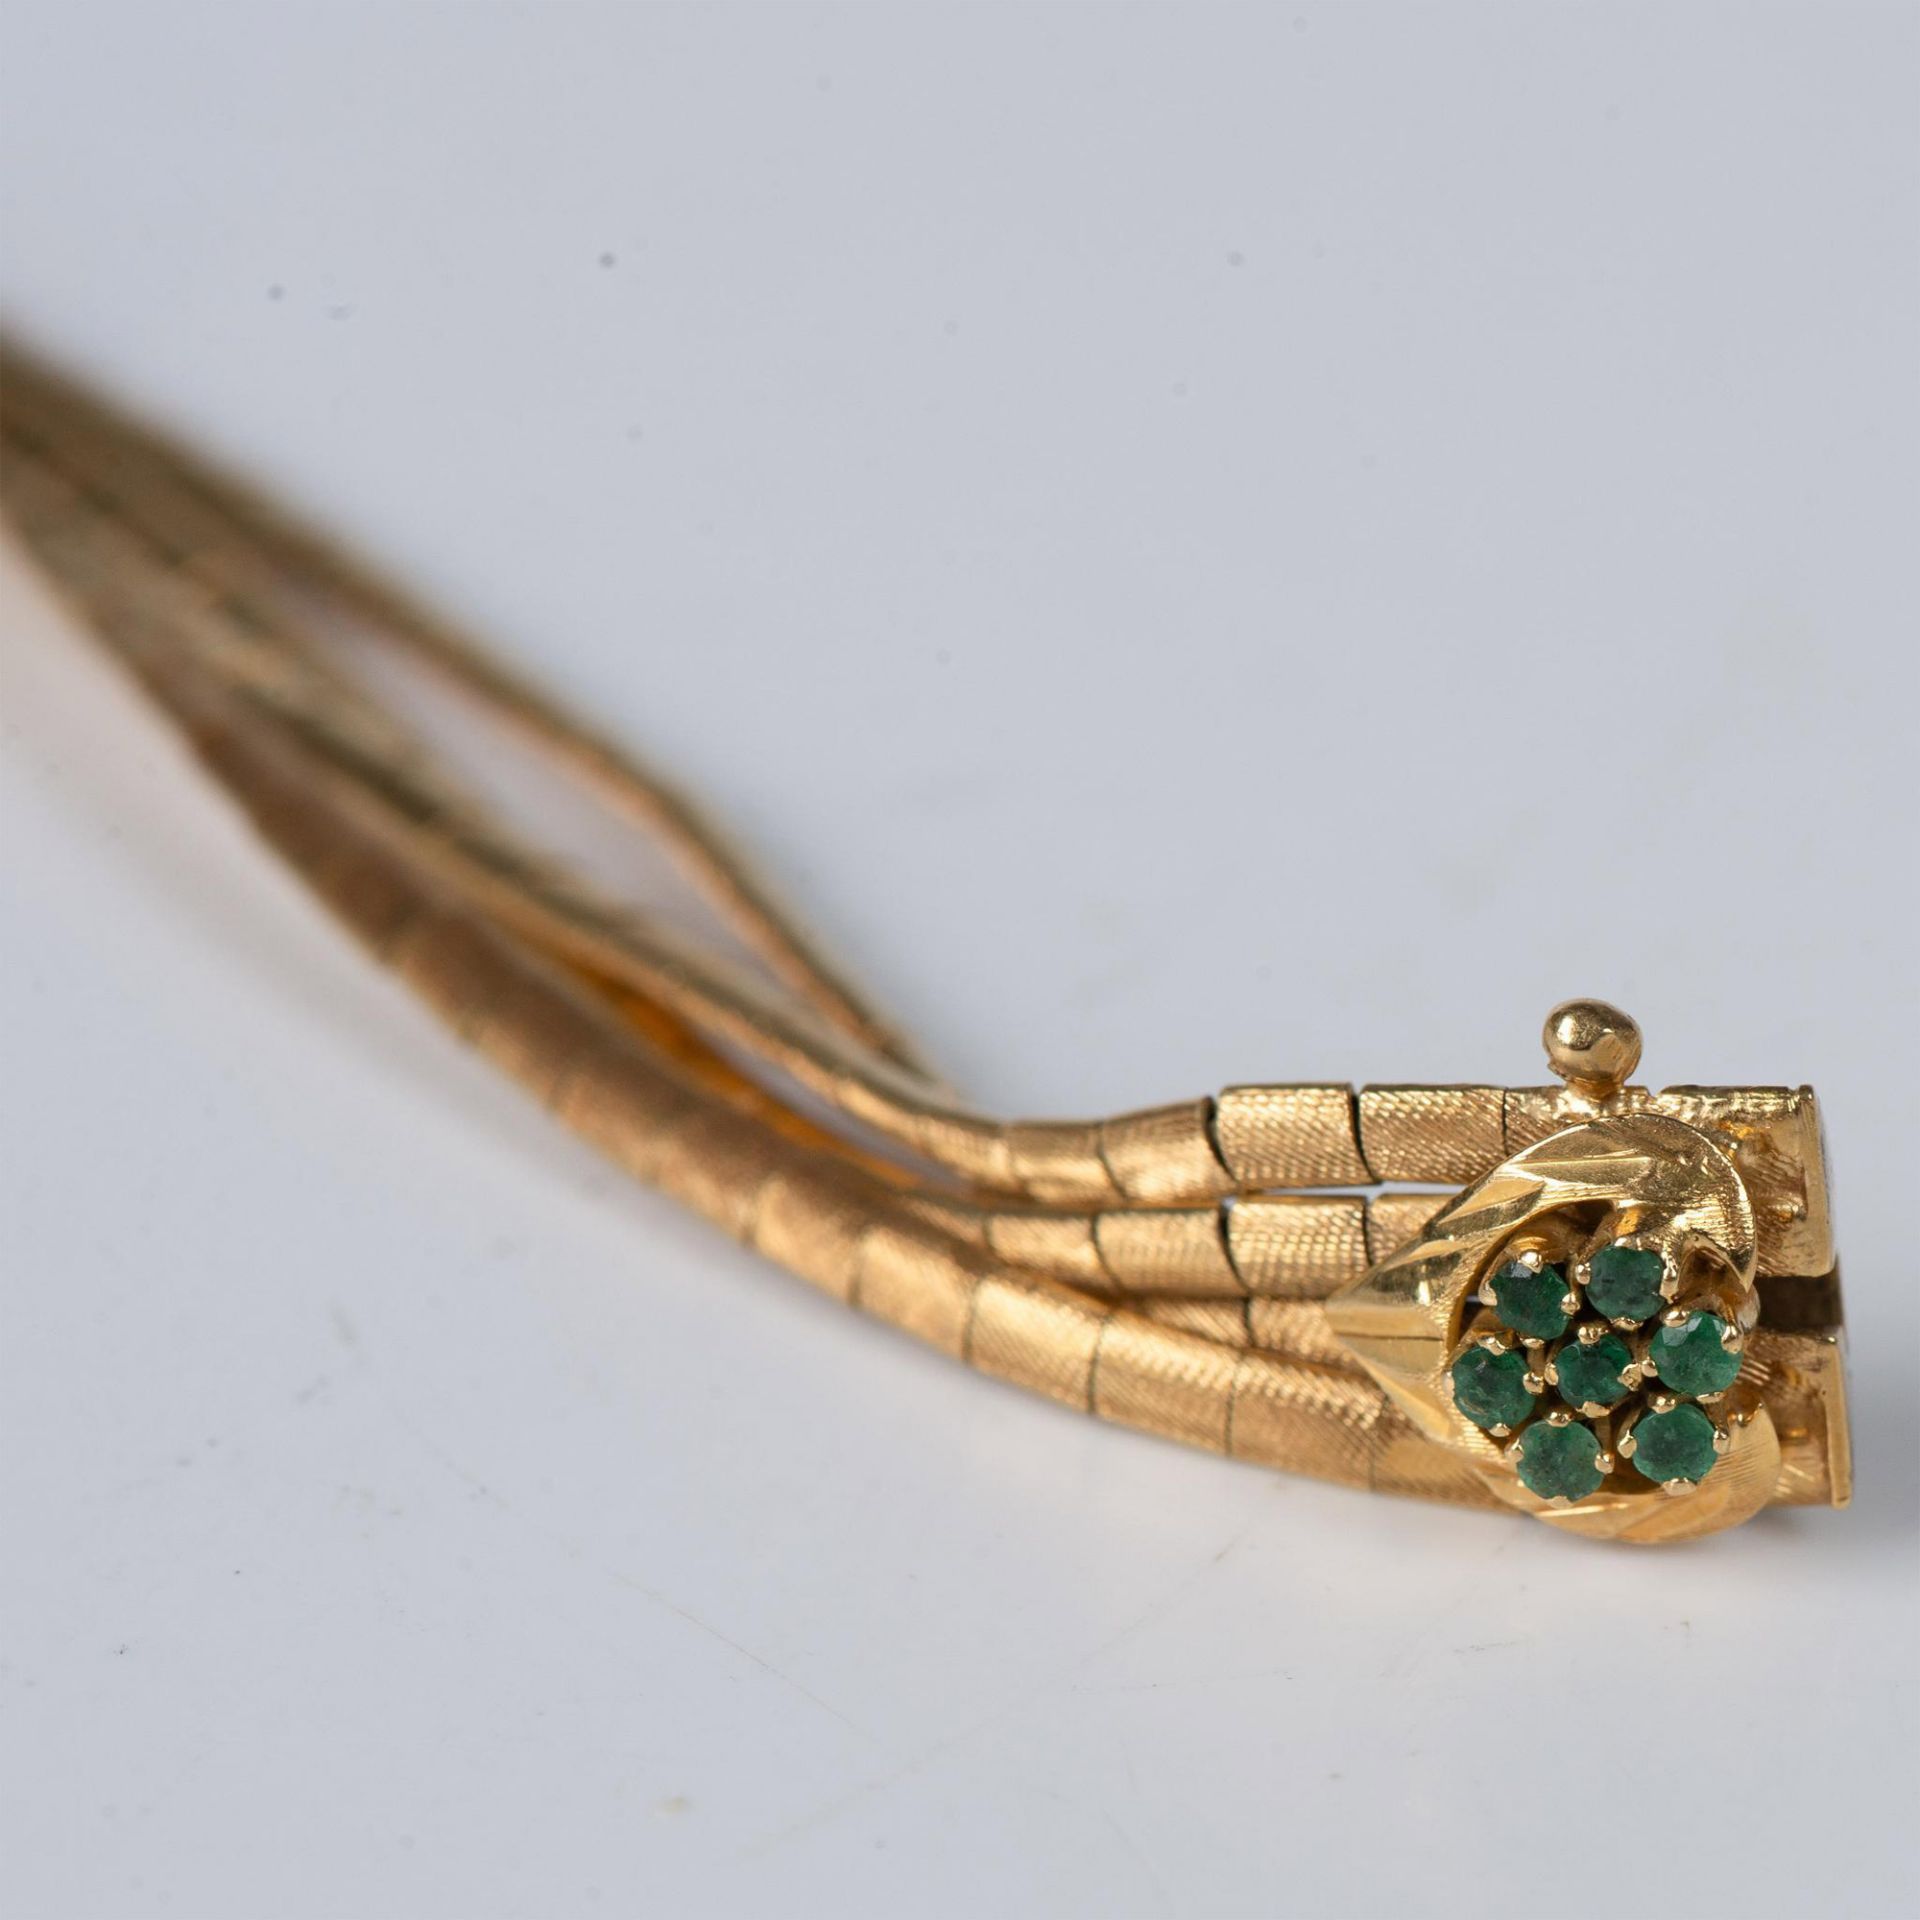 French 18K Gold Bracelet with Emeralds - Image 2 of 6